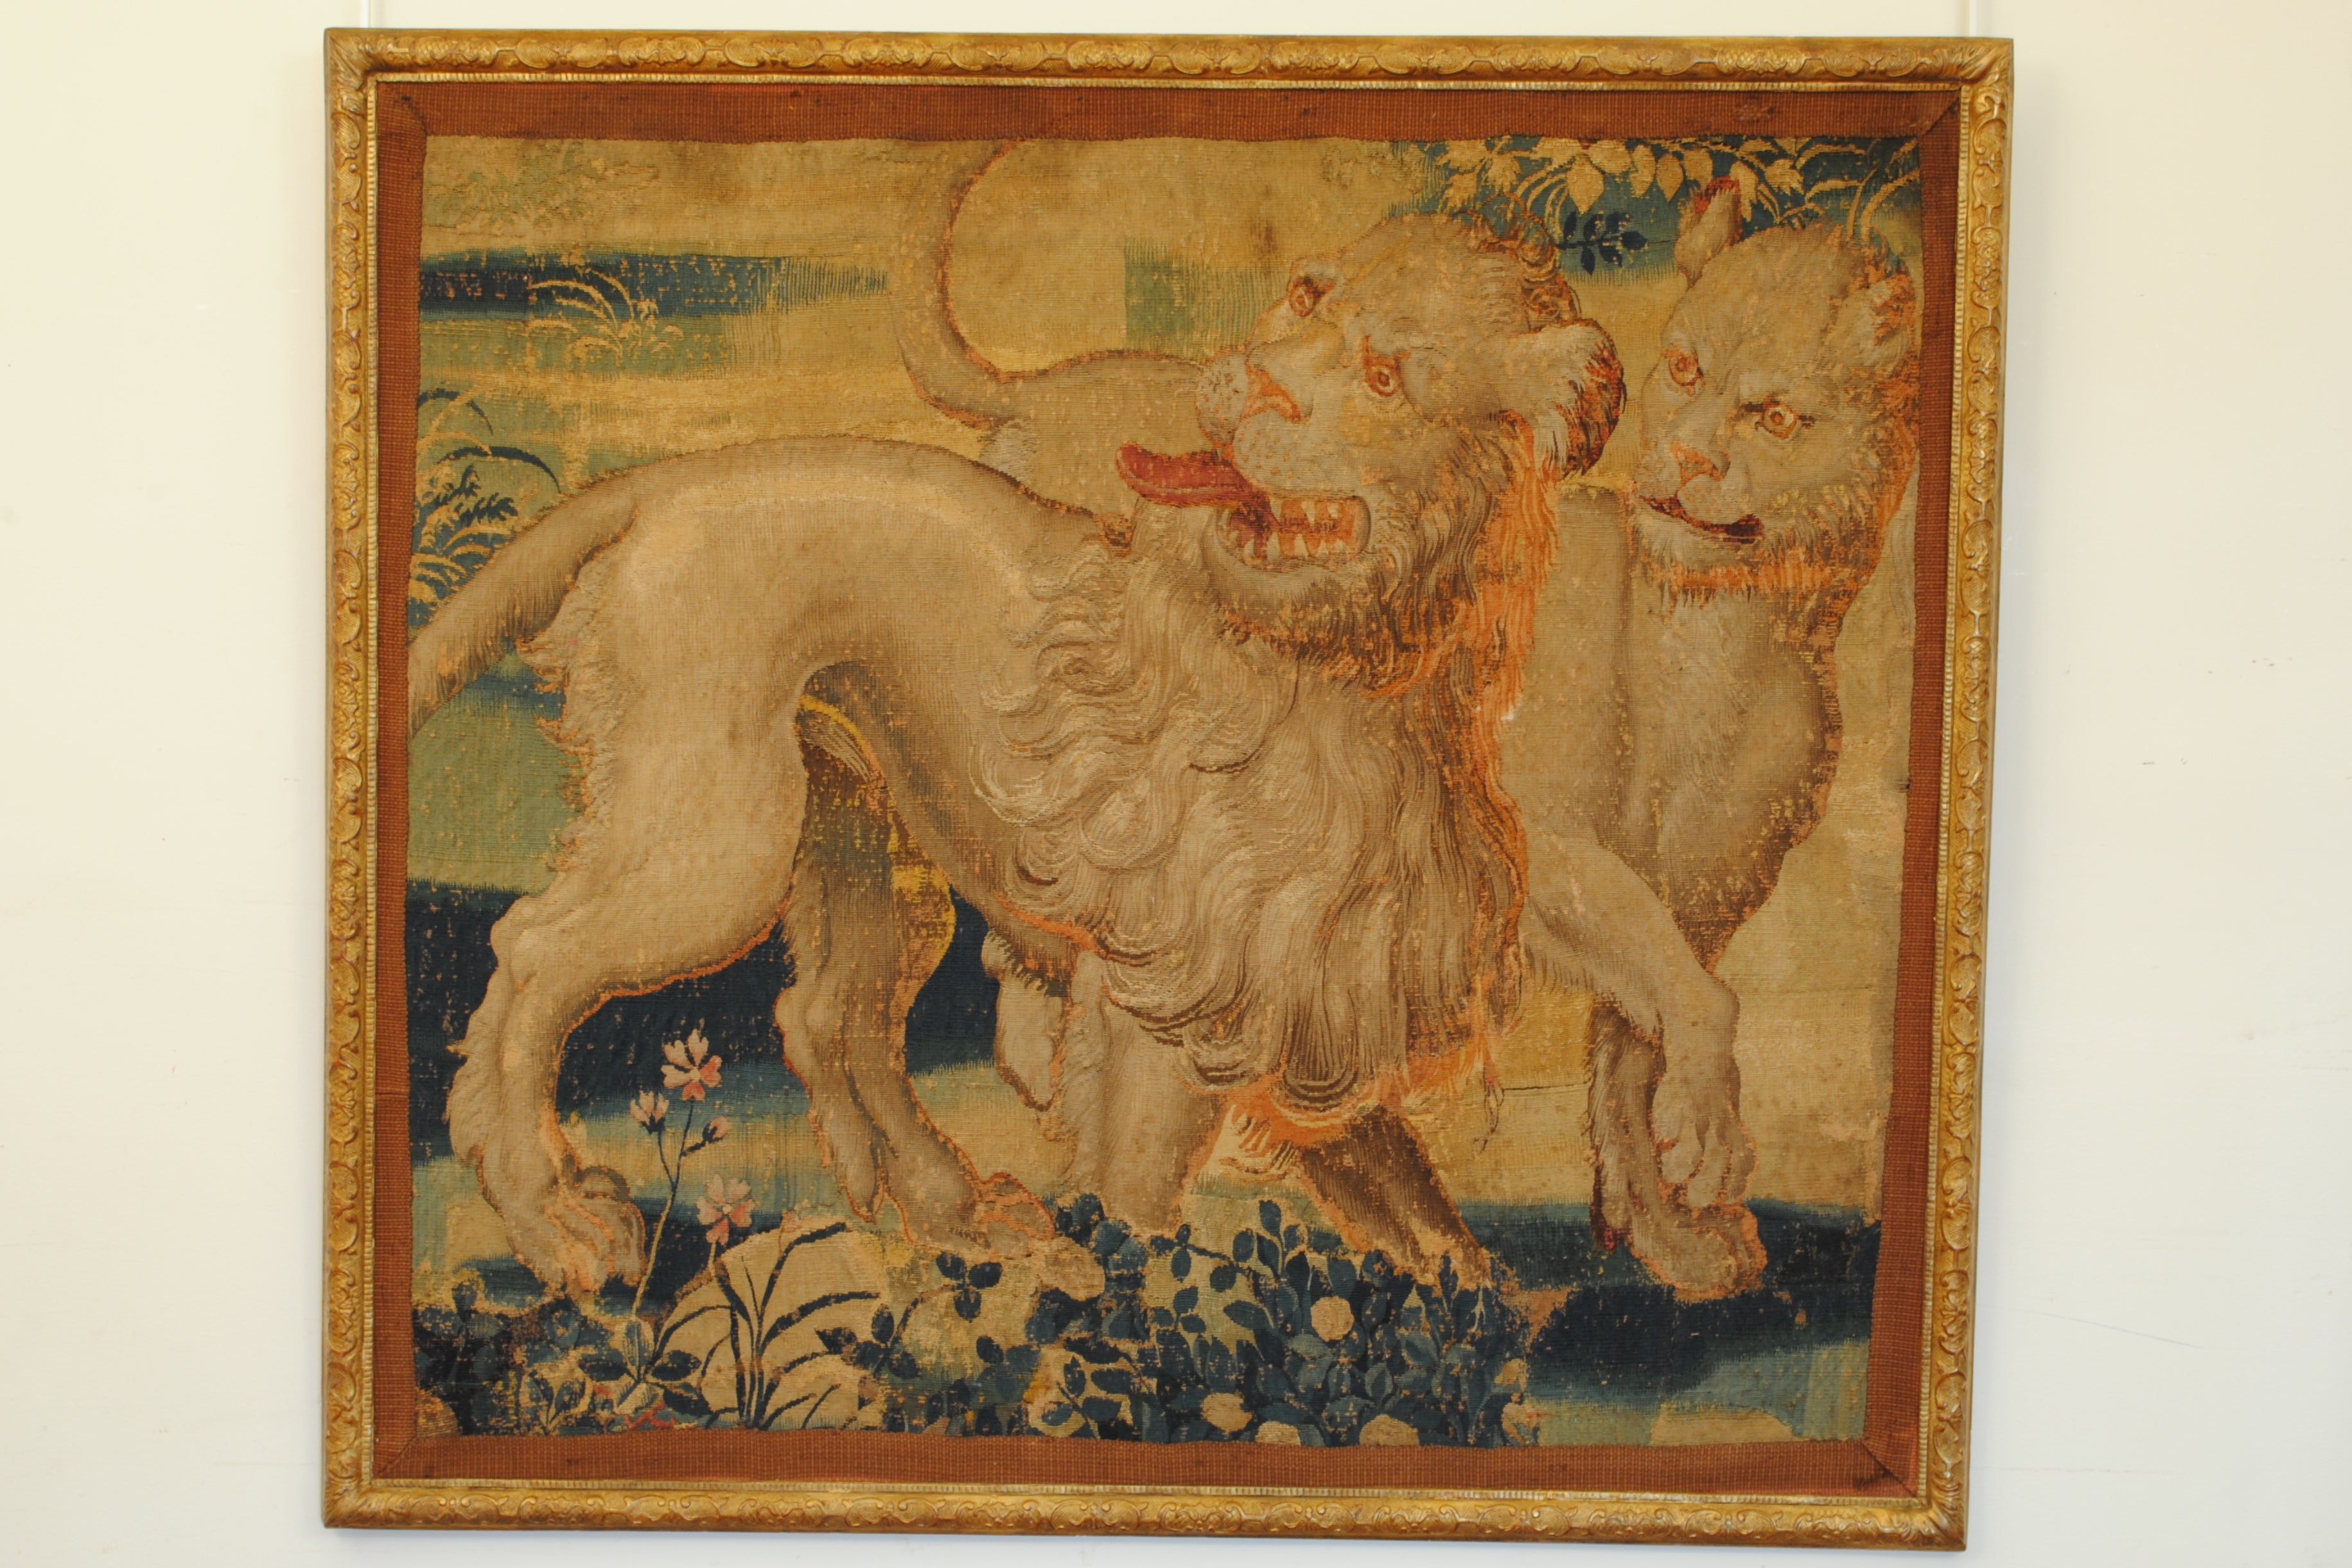 A 17th Century Flemish Tapestry Fragment in a Regence Giltwood Frame